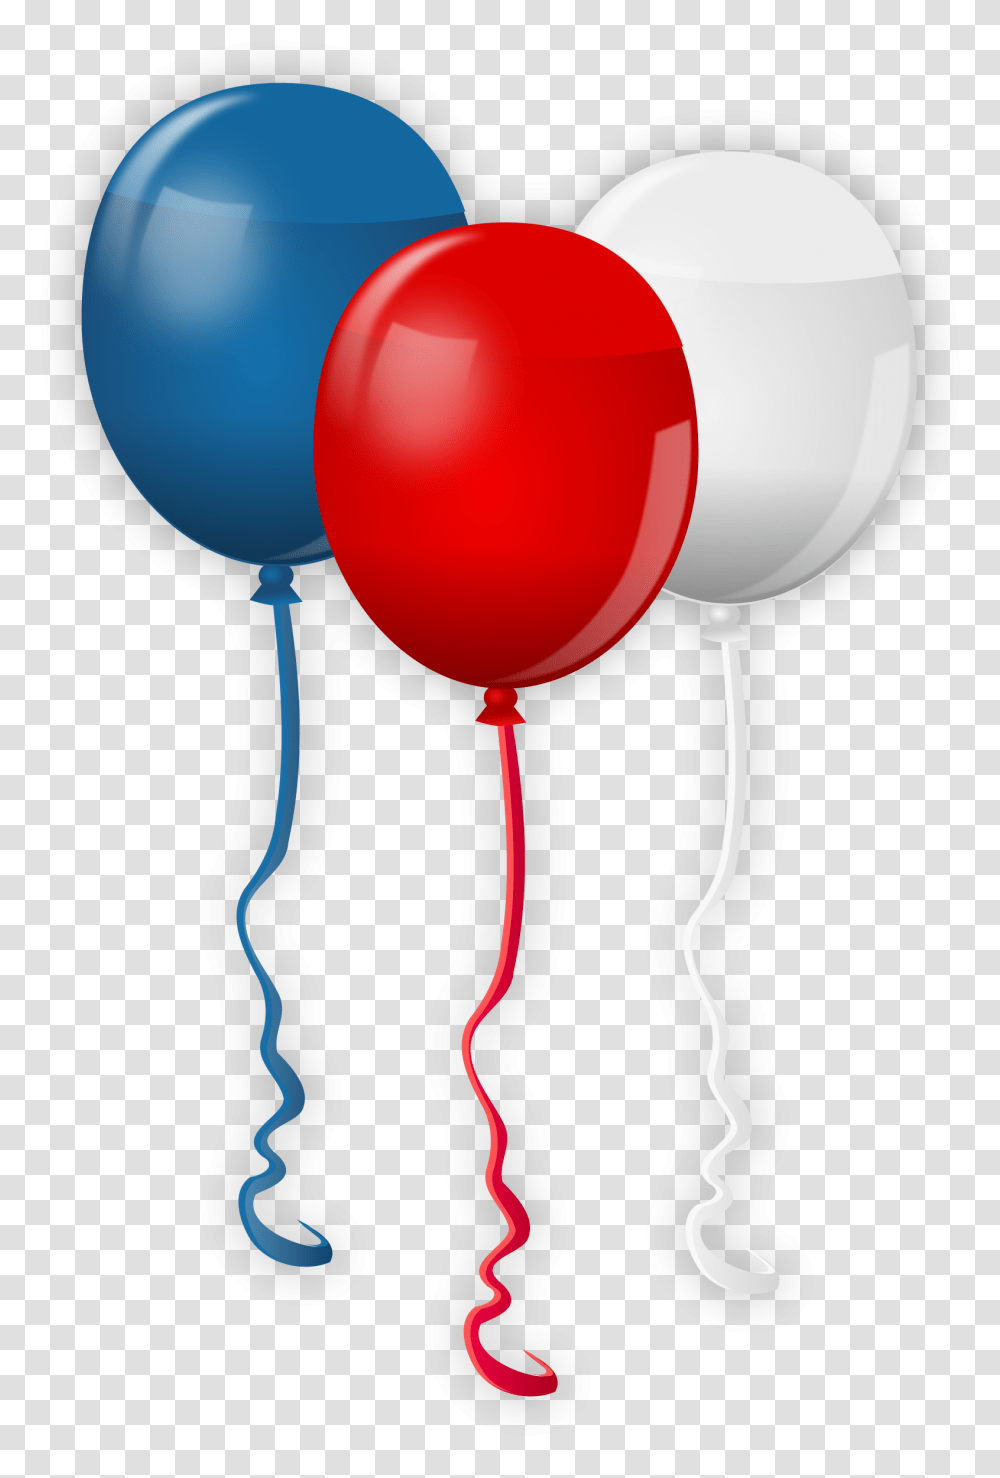 July Balloons Icons Transparent Png